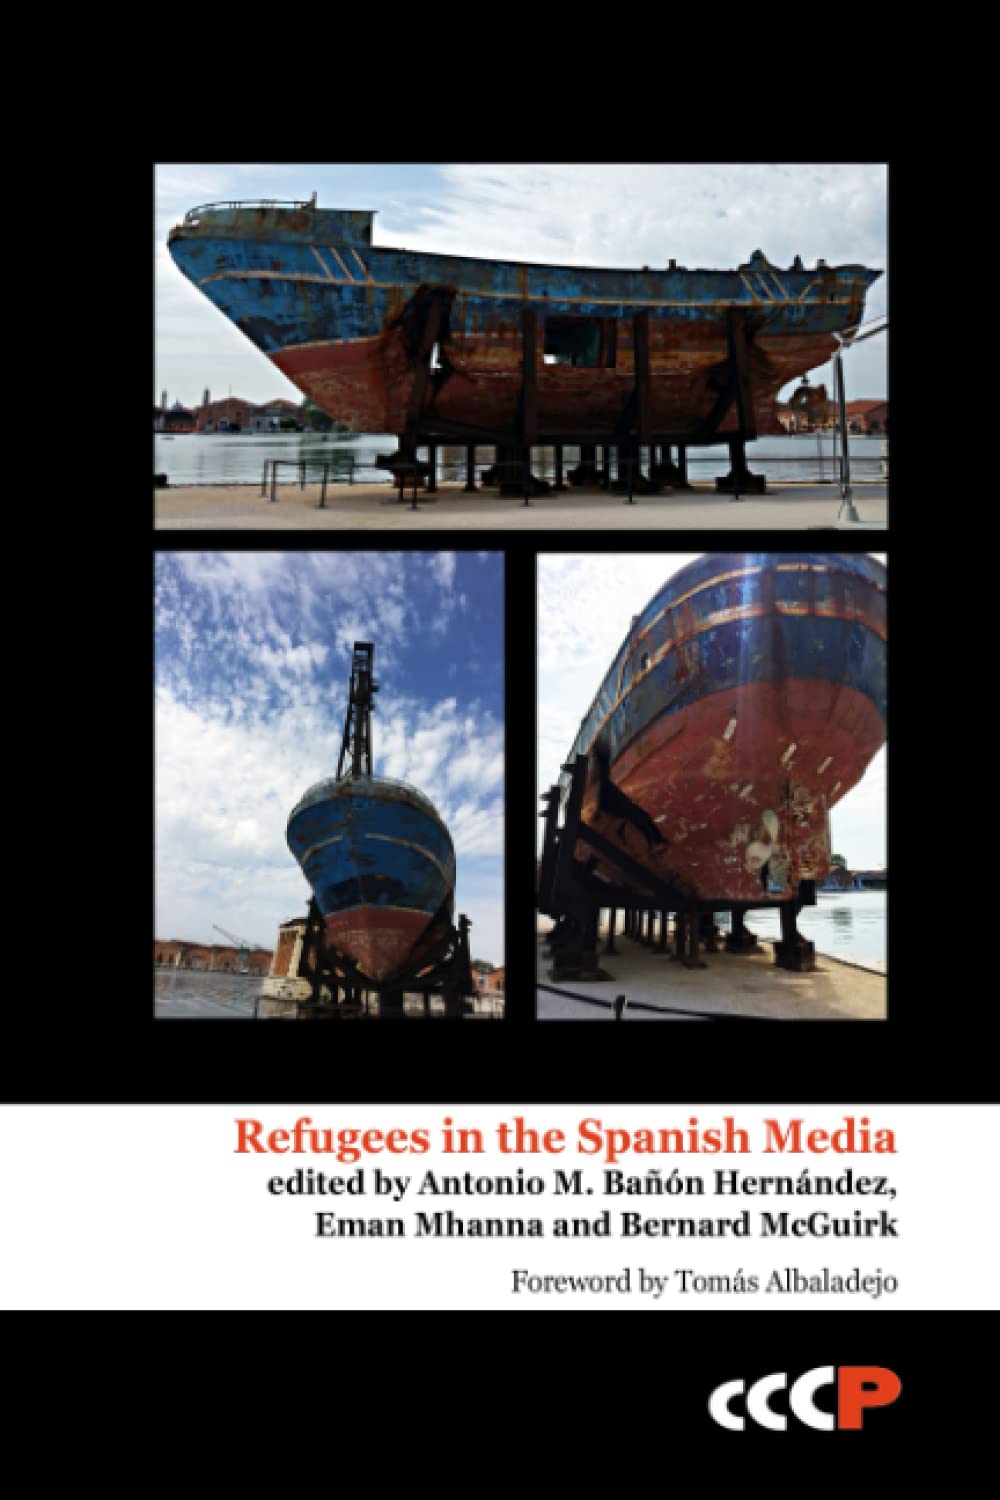 Refugees in the Spanish Media